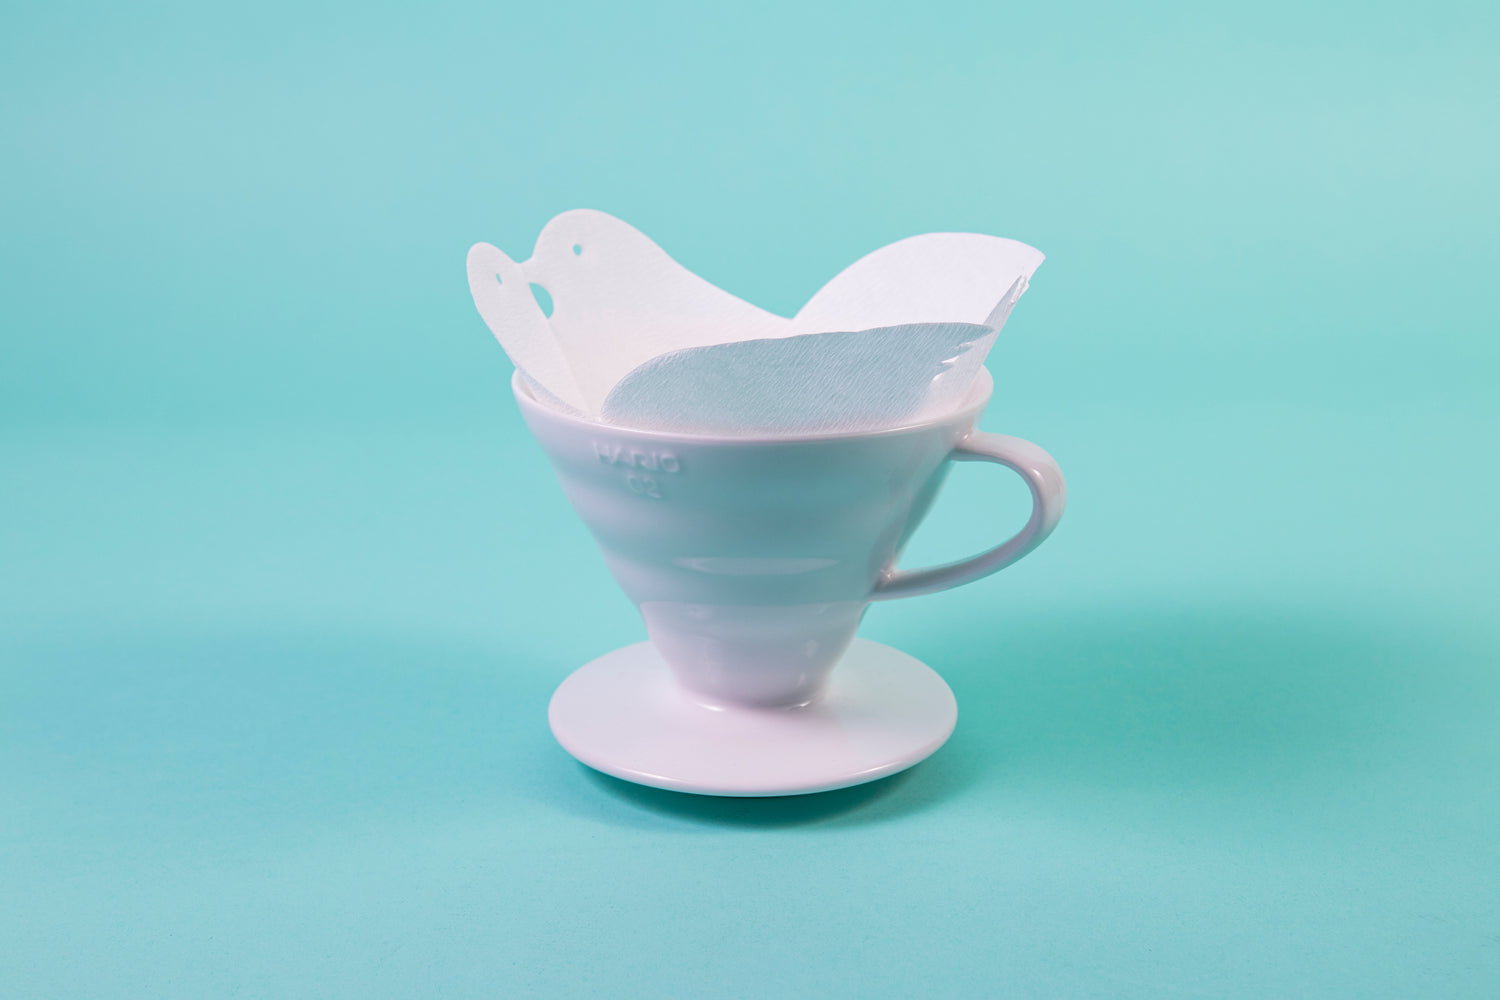 White cone paper filter, shaped into two birds kissing at the top, seated in a white ceramic cone-shaped dripper and set against a blue background.